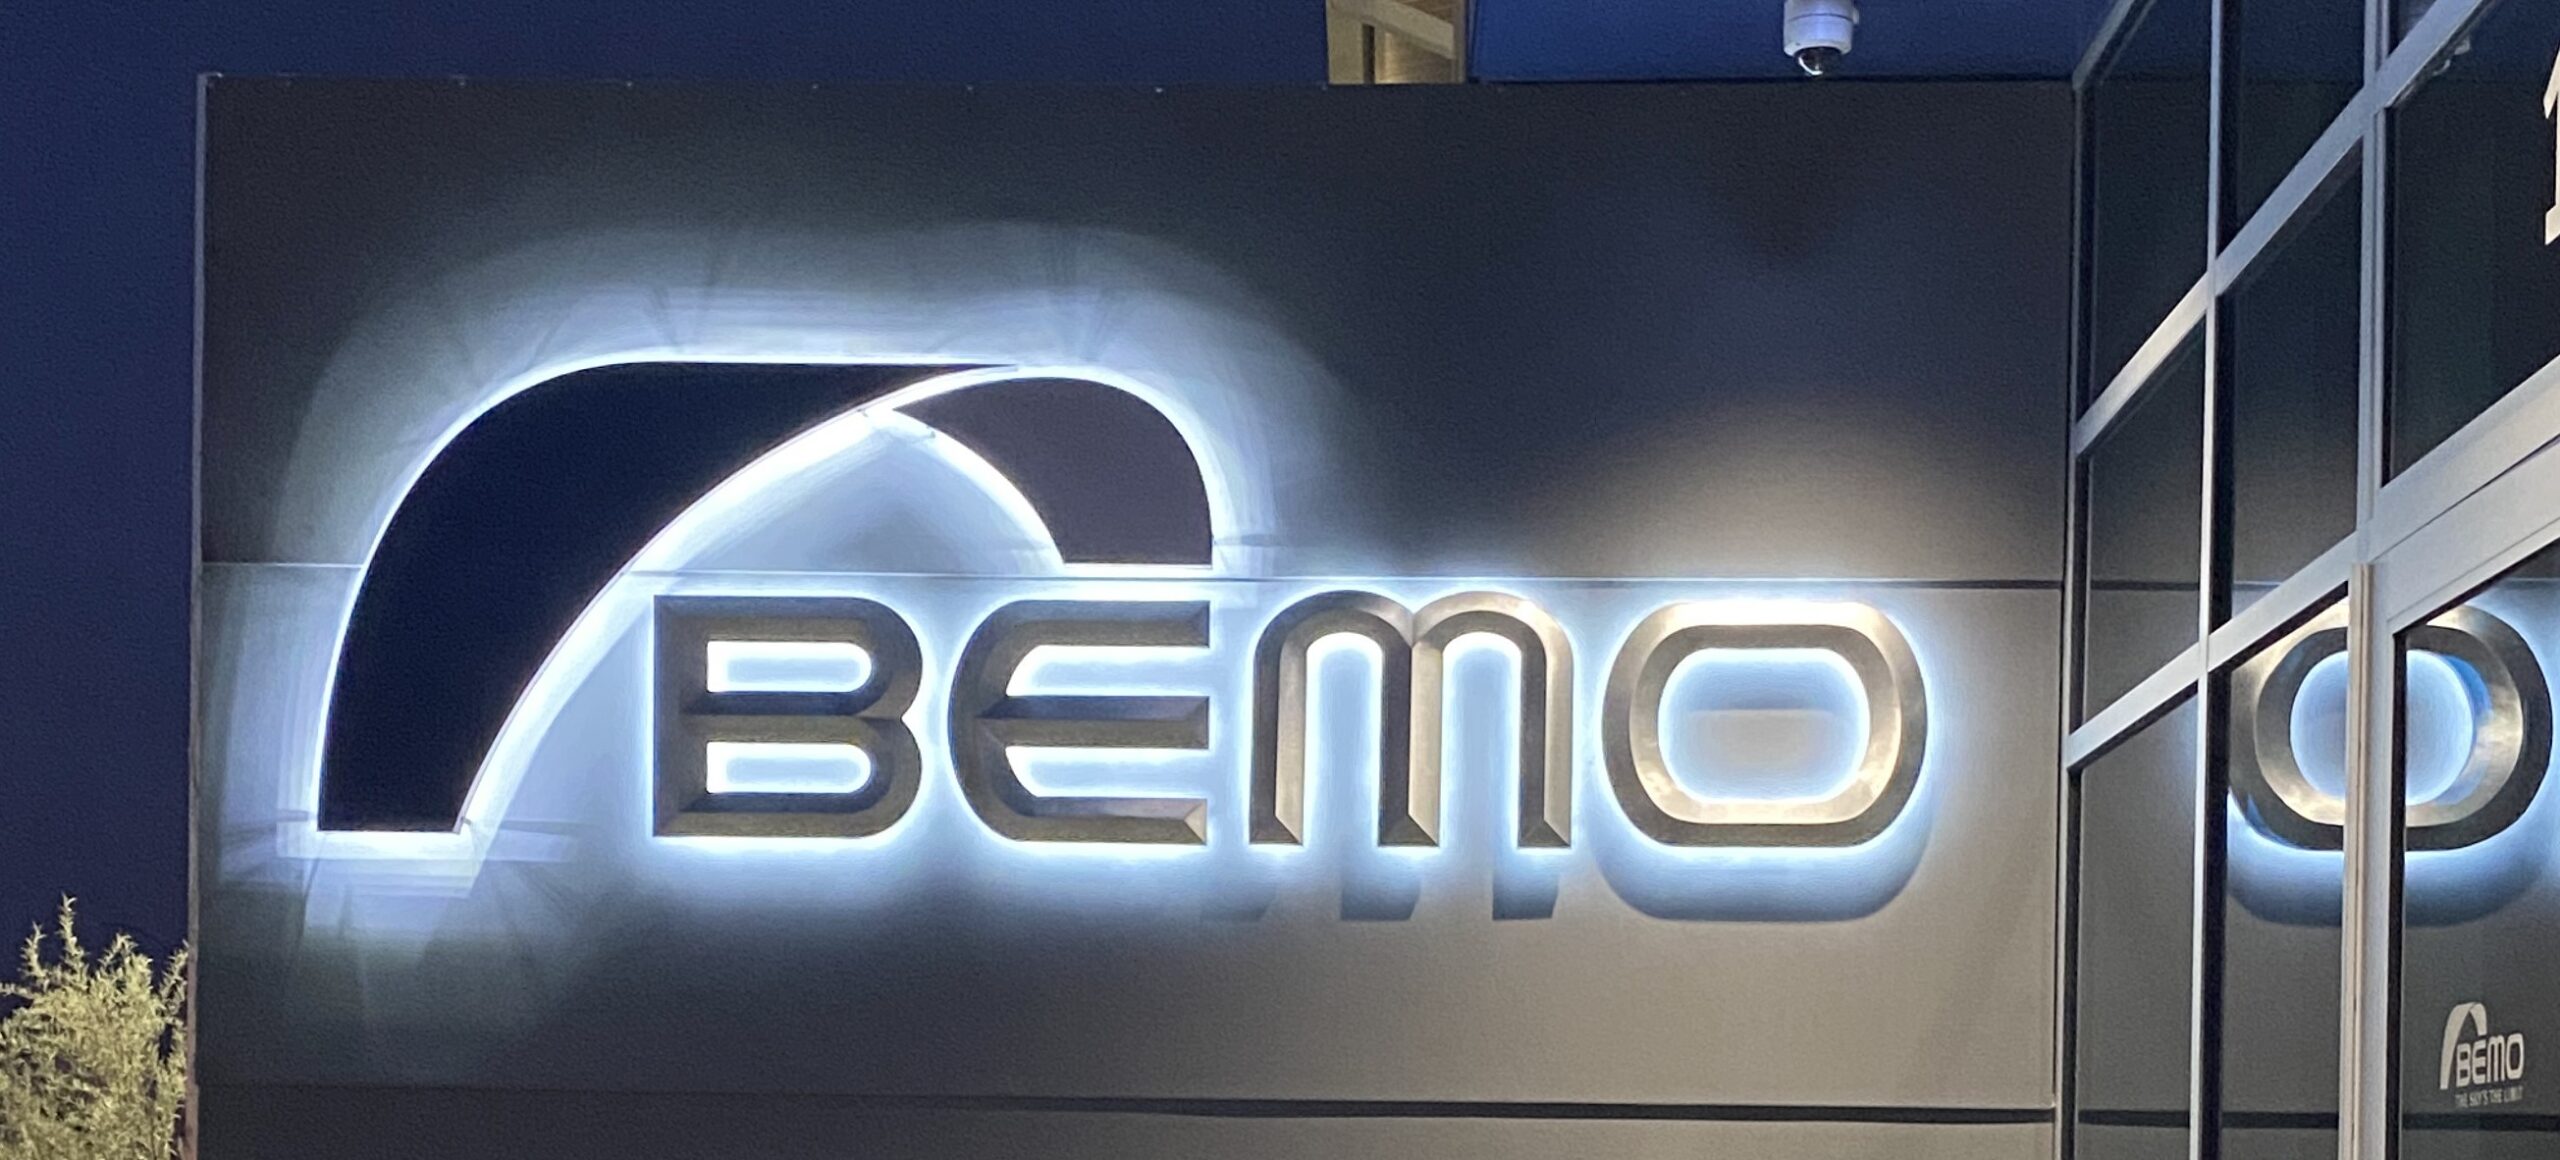 LED illuminated commercial sign at night